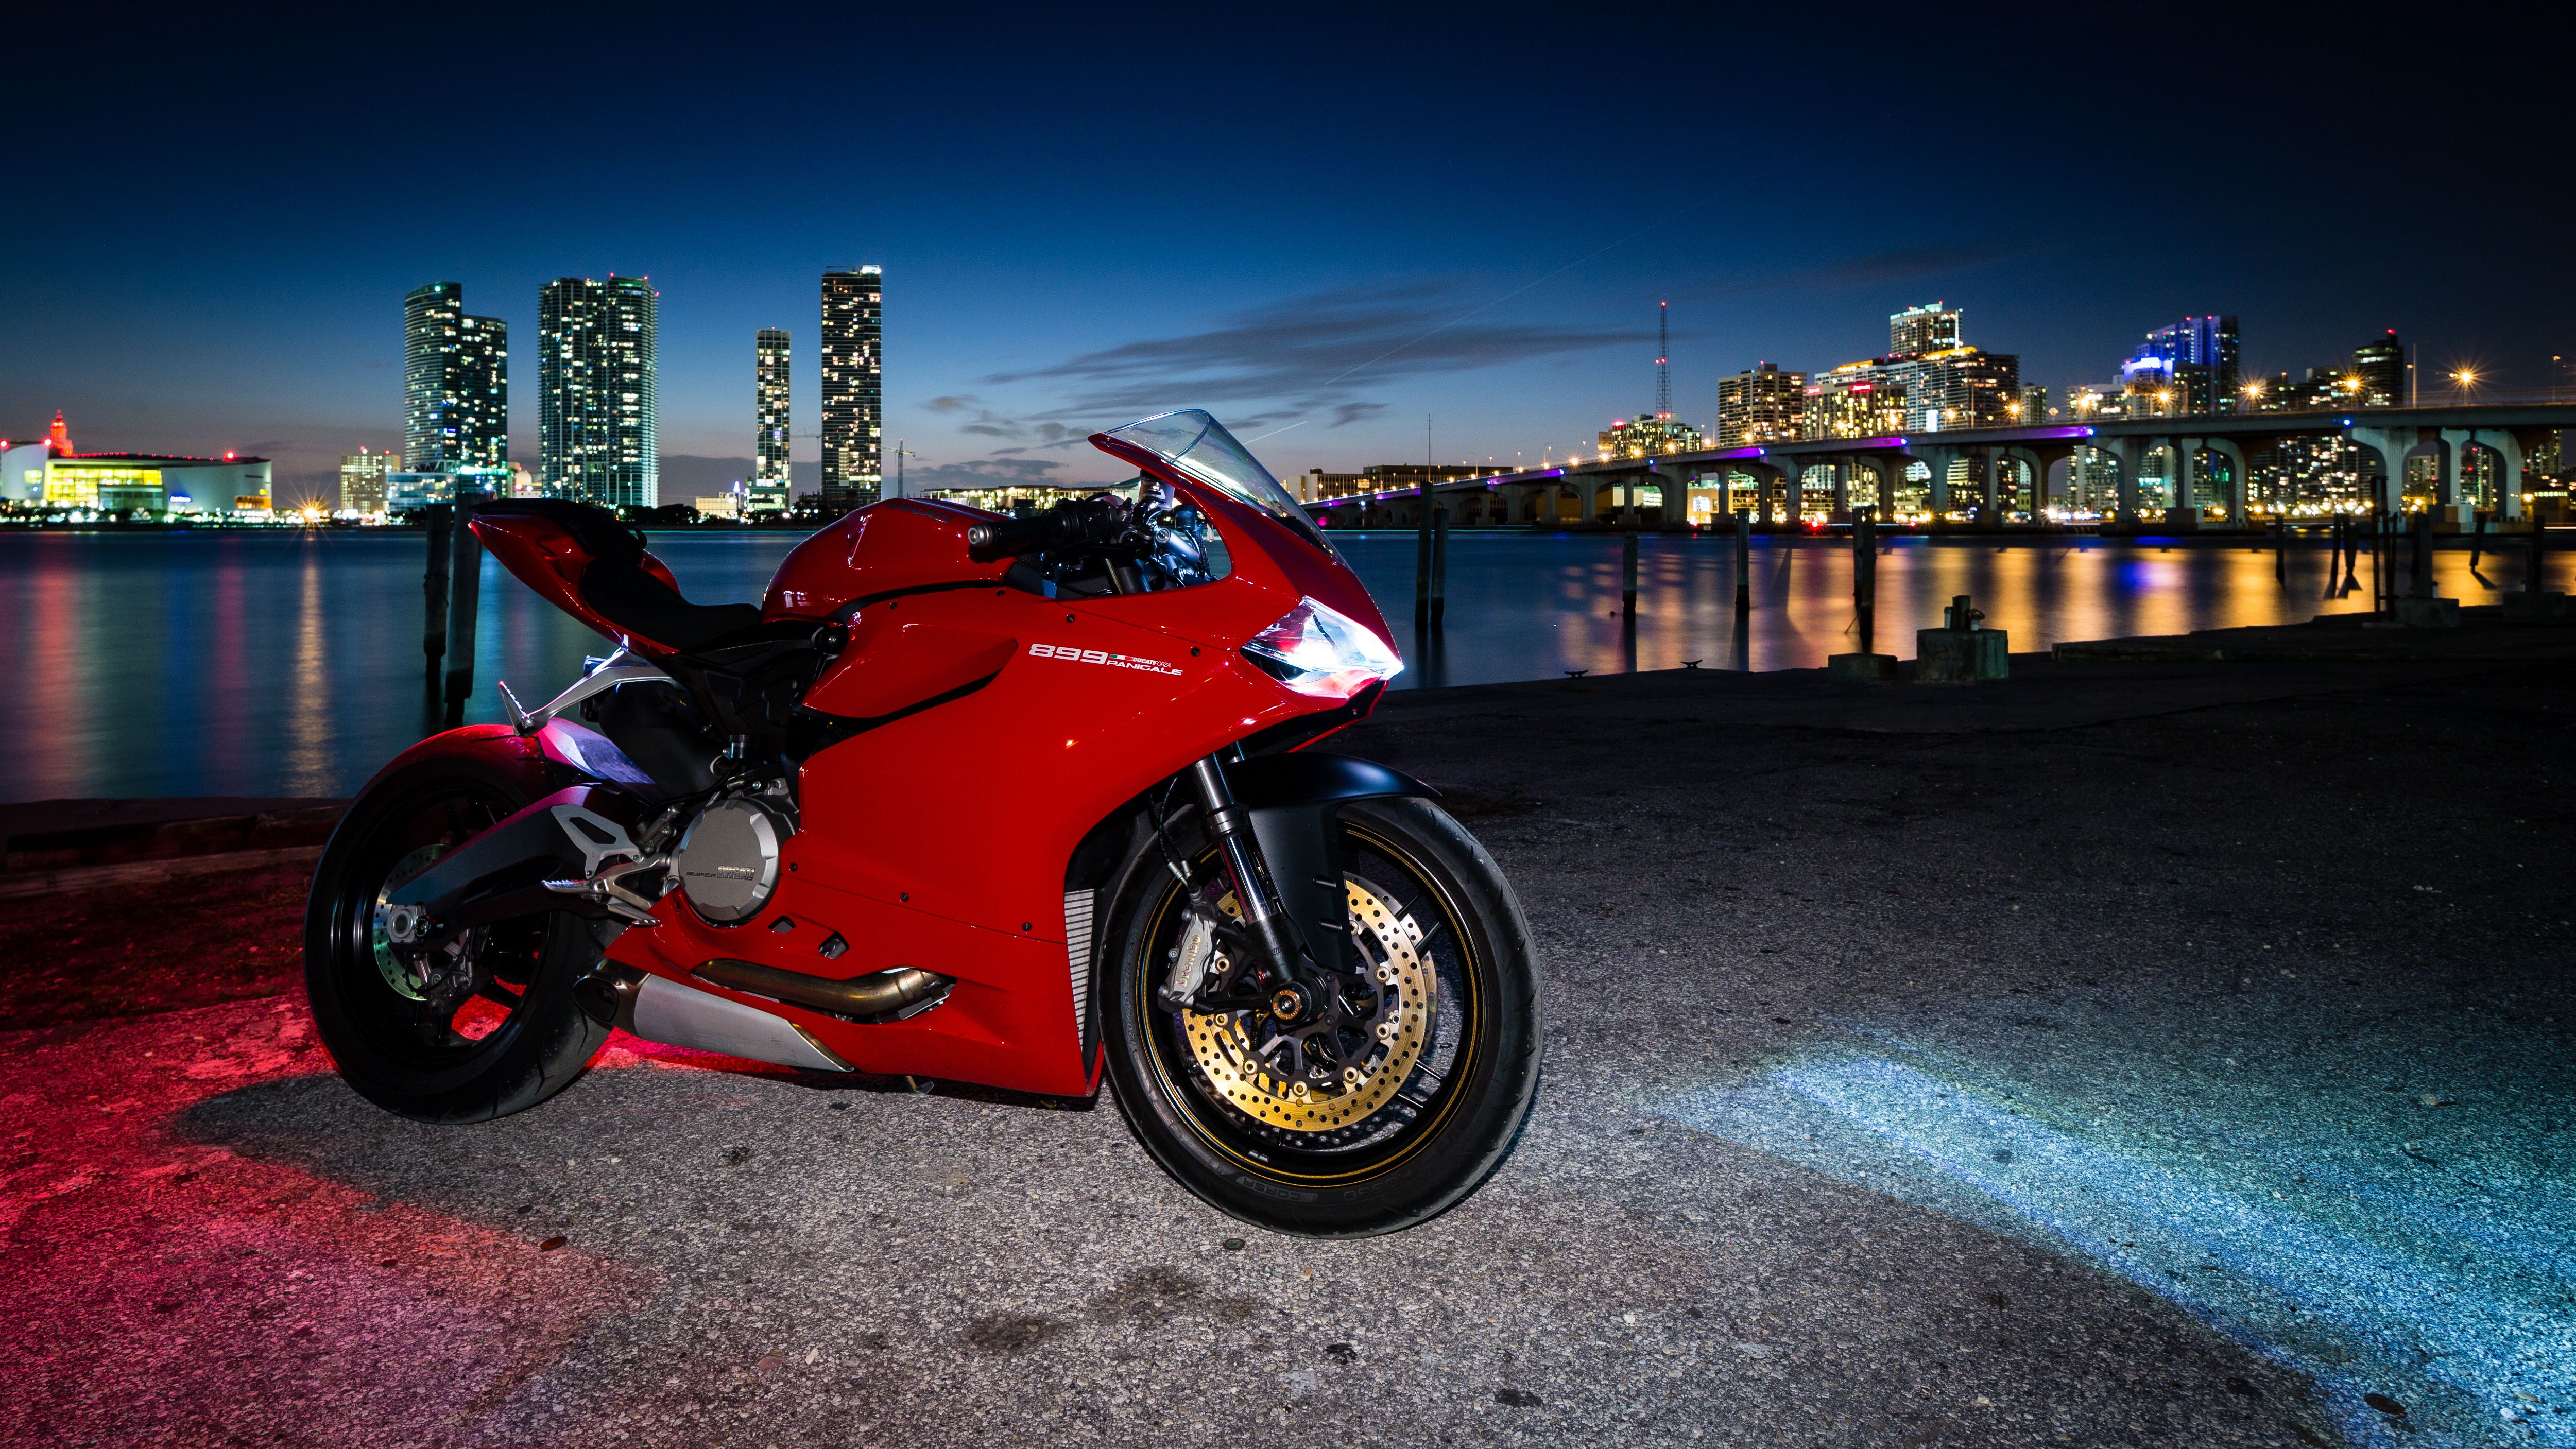 Ducati 899 Panigale Wallpapers